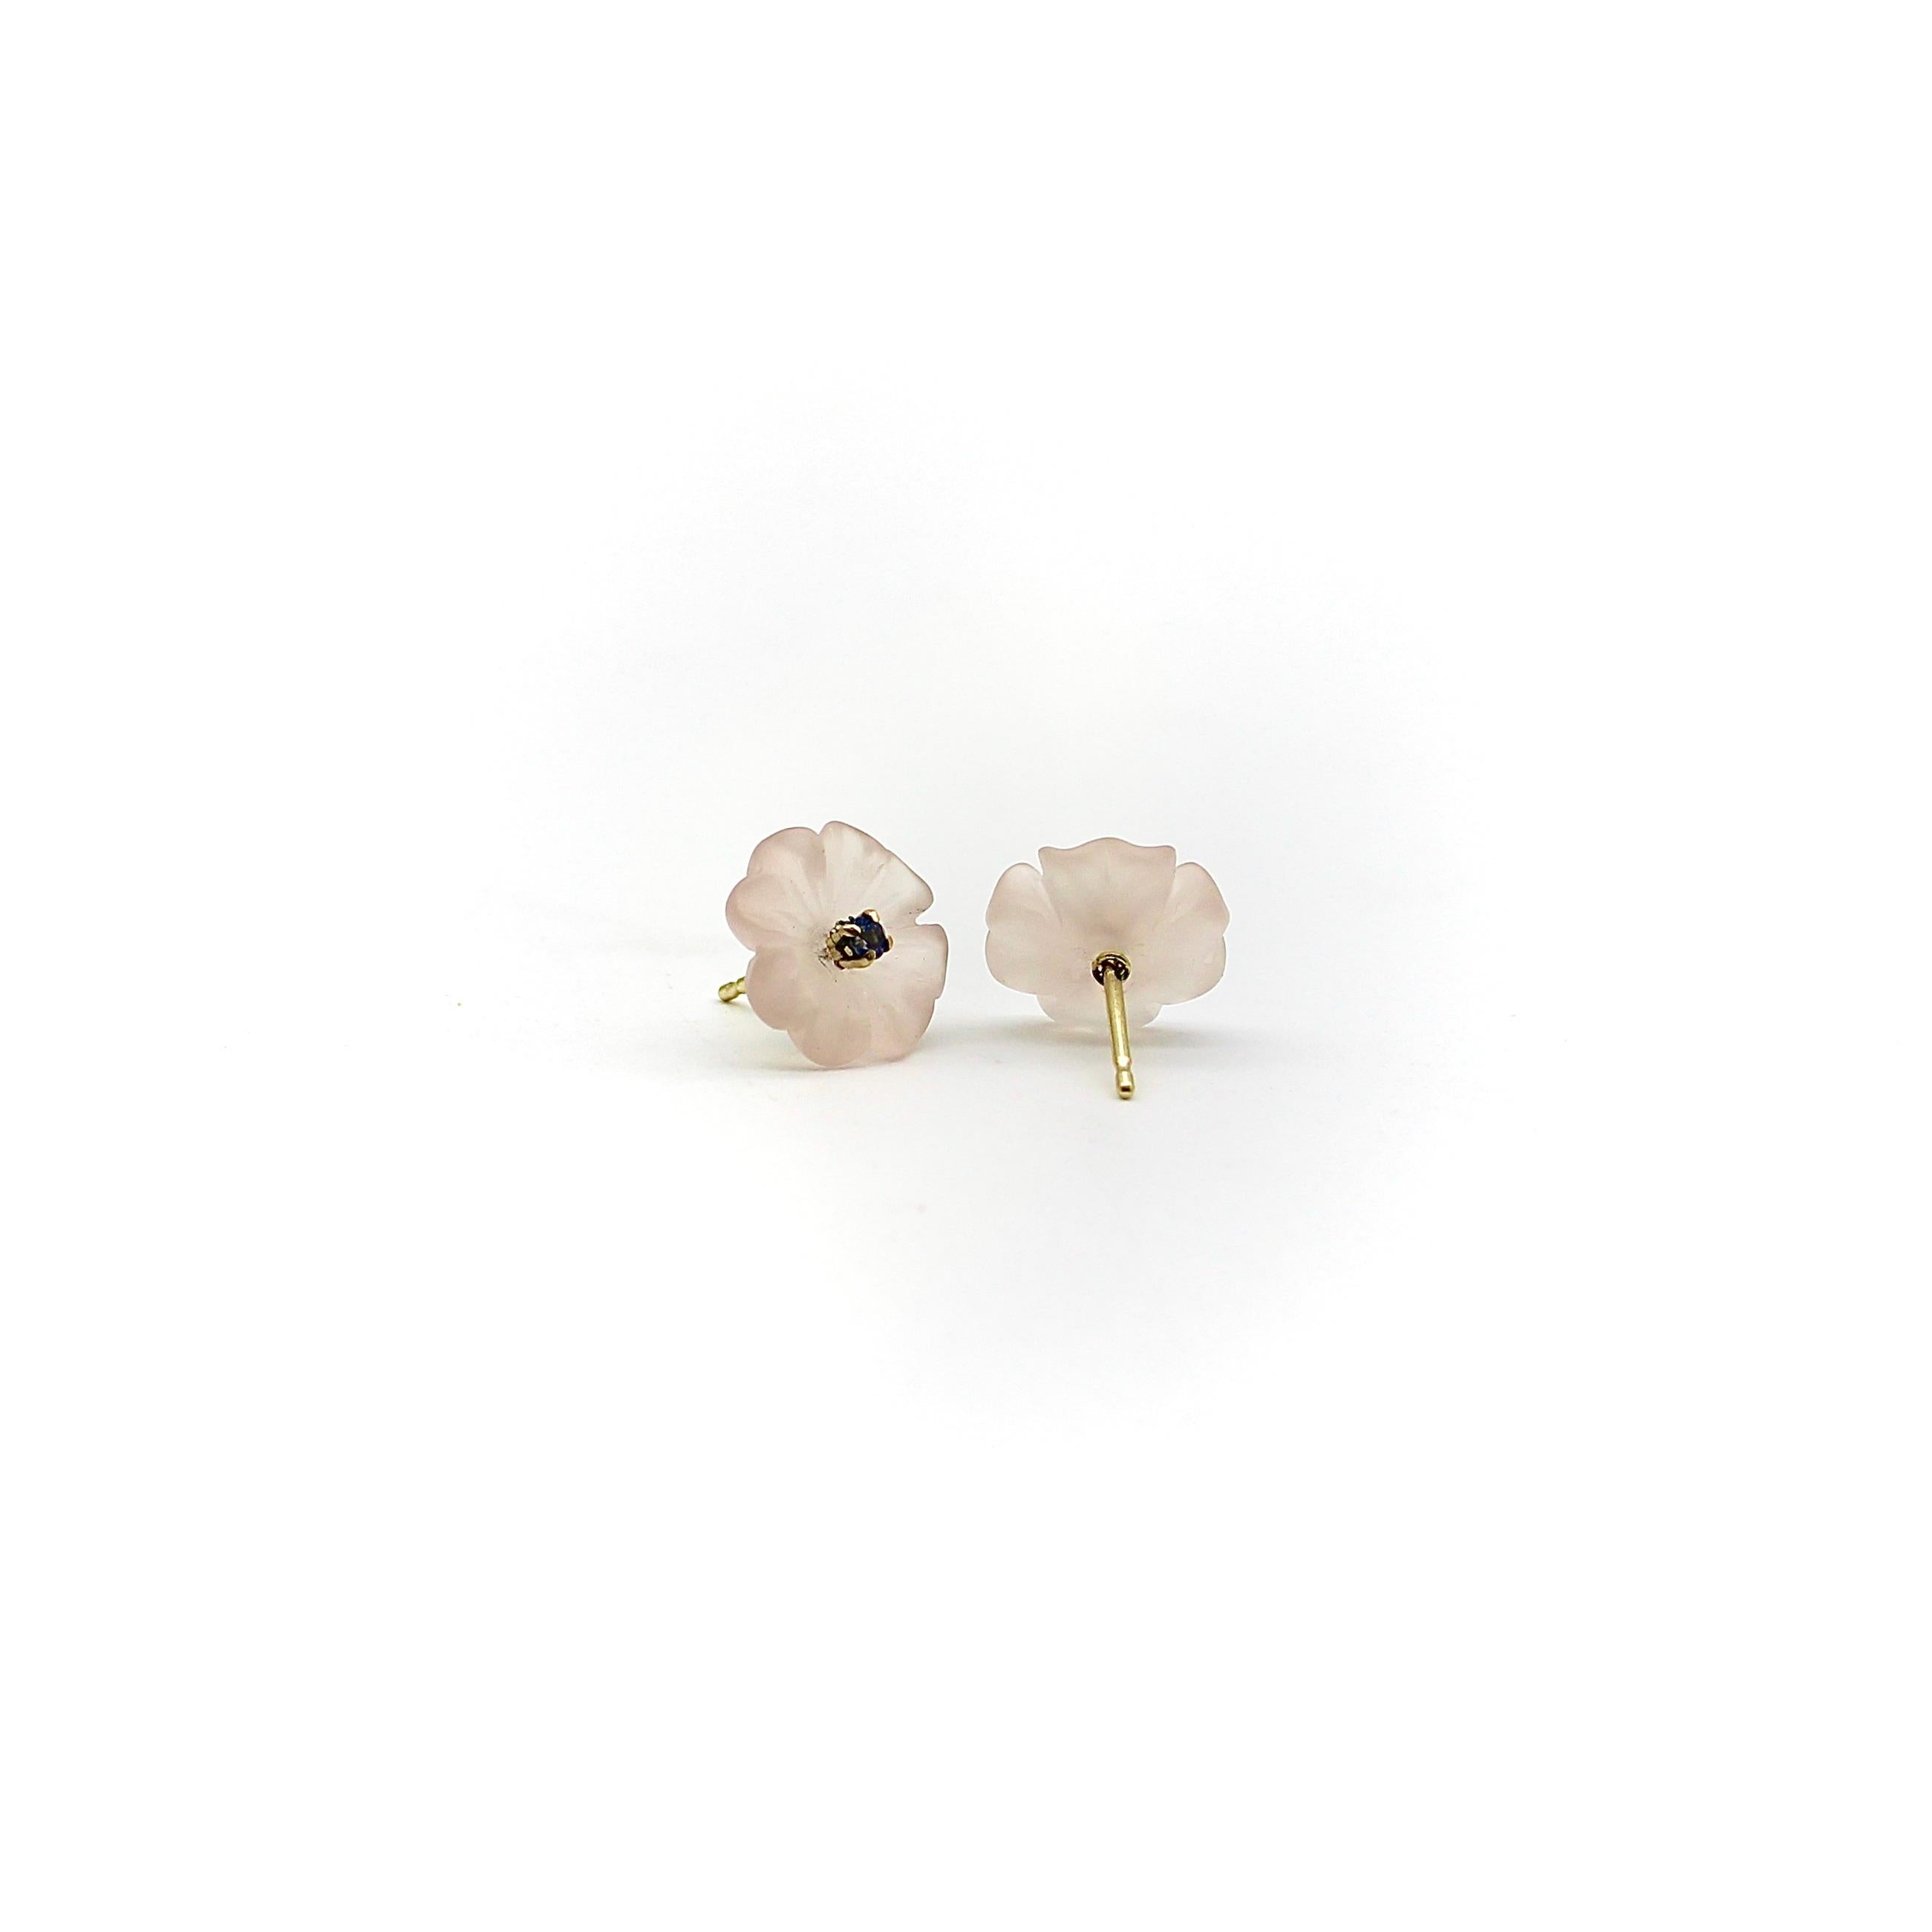 Carved Rose Quartz Flower Earrings with 14k Gold Mount In New Condition For Sale In Venice, CA